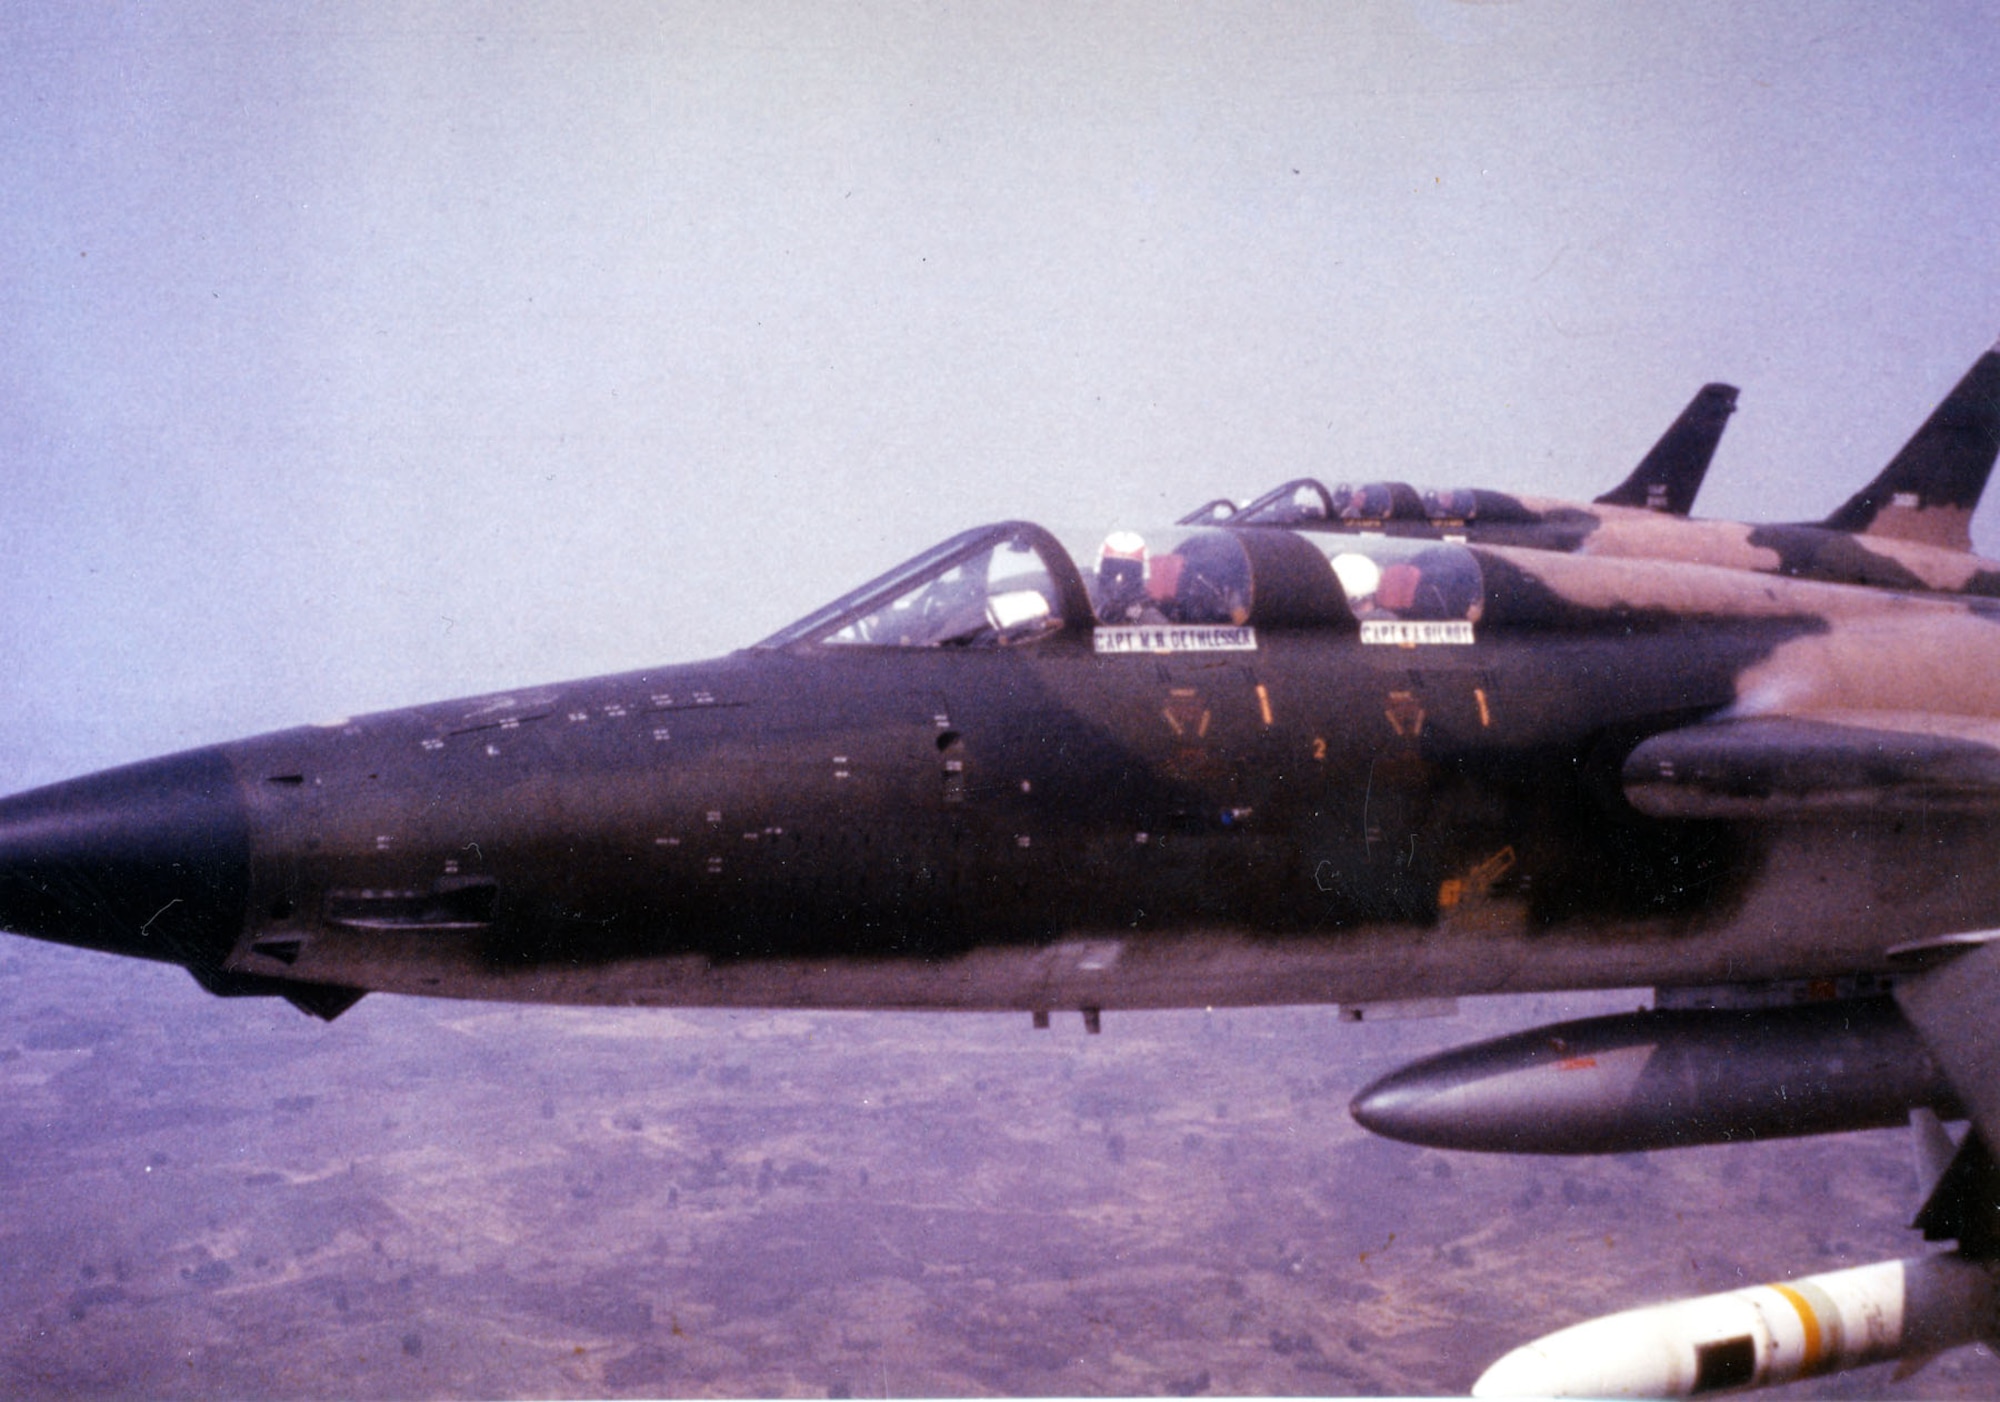 Capts. Dethlefsen and Gilroy in their F-105F in April 1967. (U.S. Air Force photo)